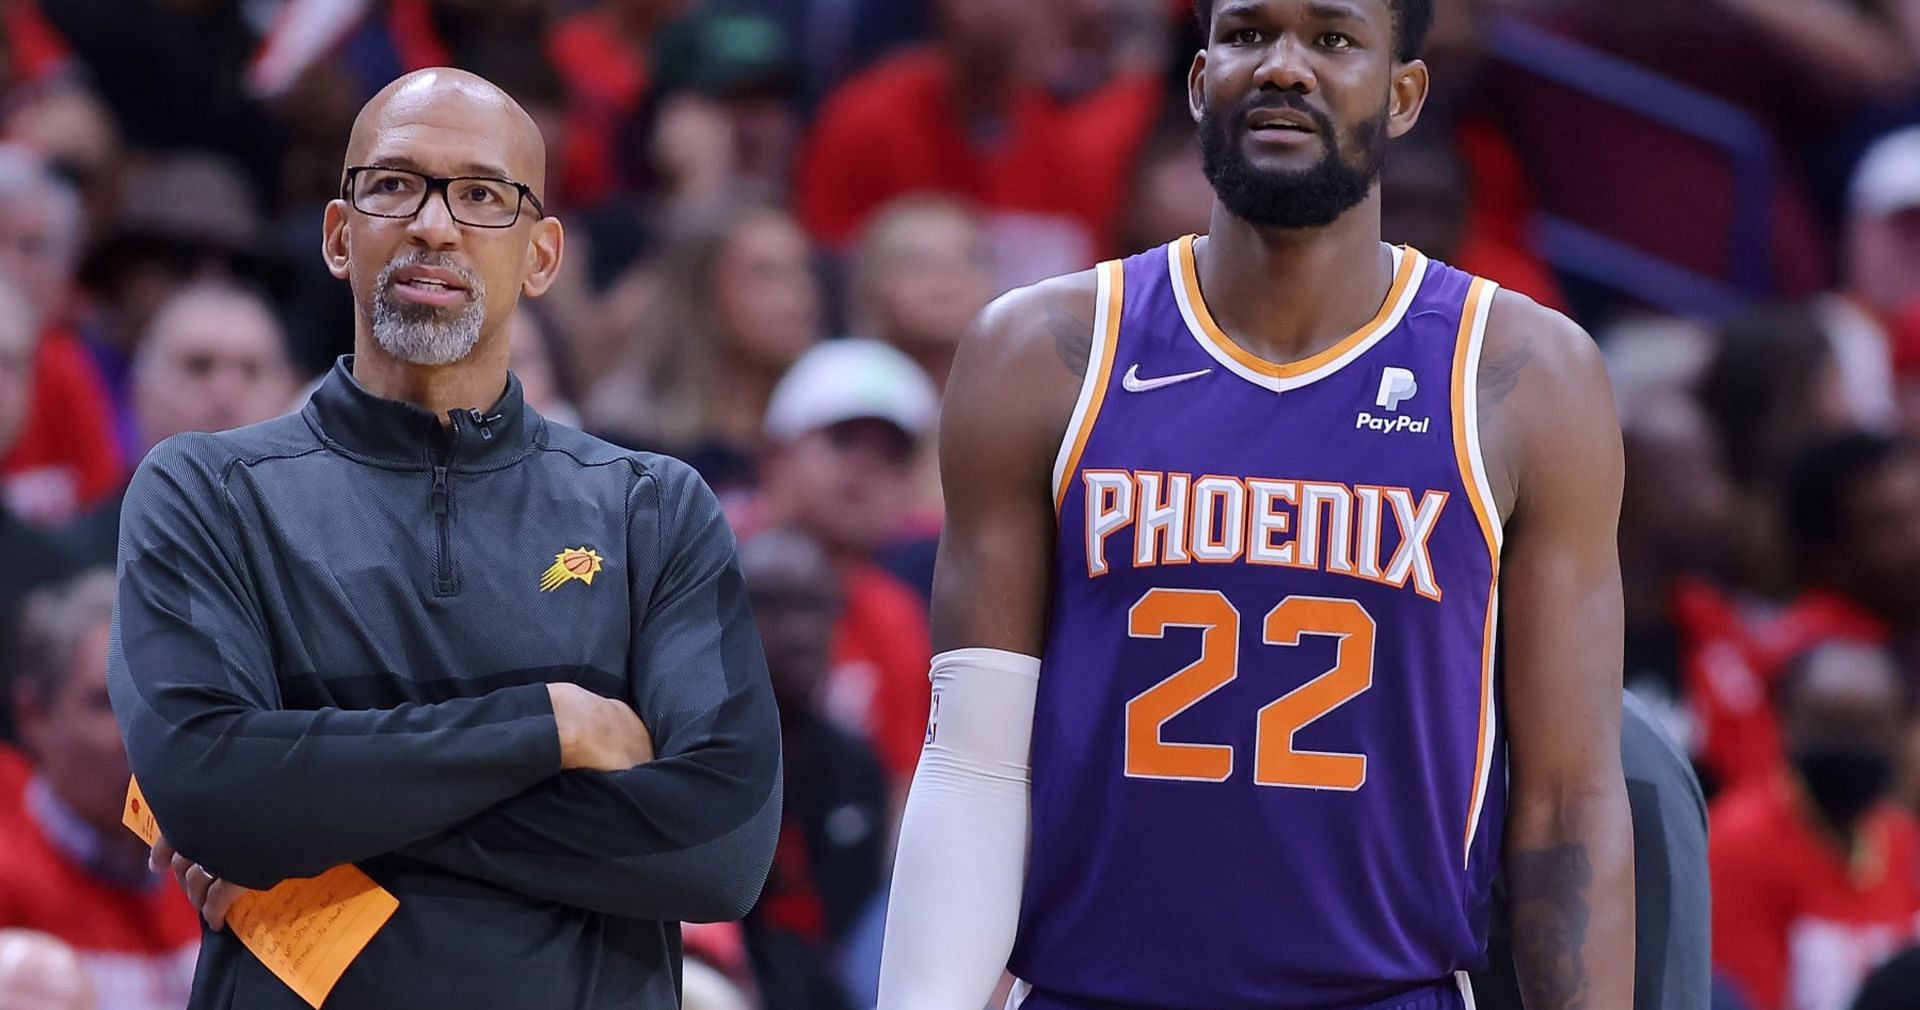 Phoenix Suns head coach Monty Williams and Deandre Ayton have not spoken since their humiliating Game 7 loss to the Dallas Mavericks. [photo: Bleacher Report]